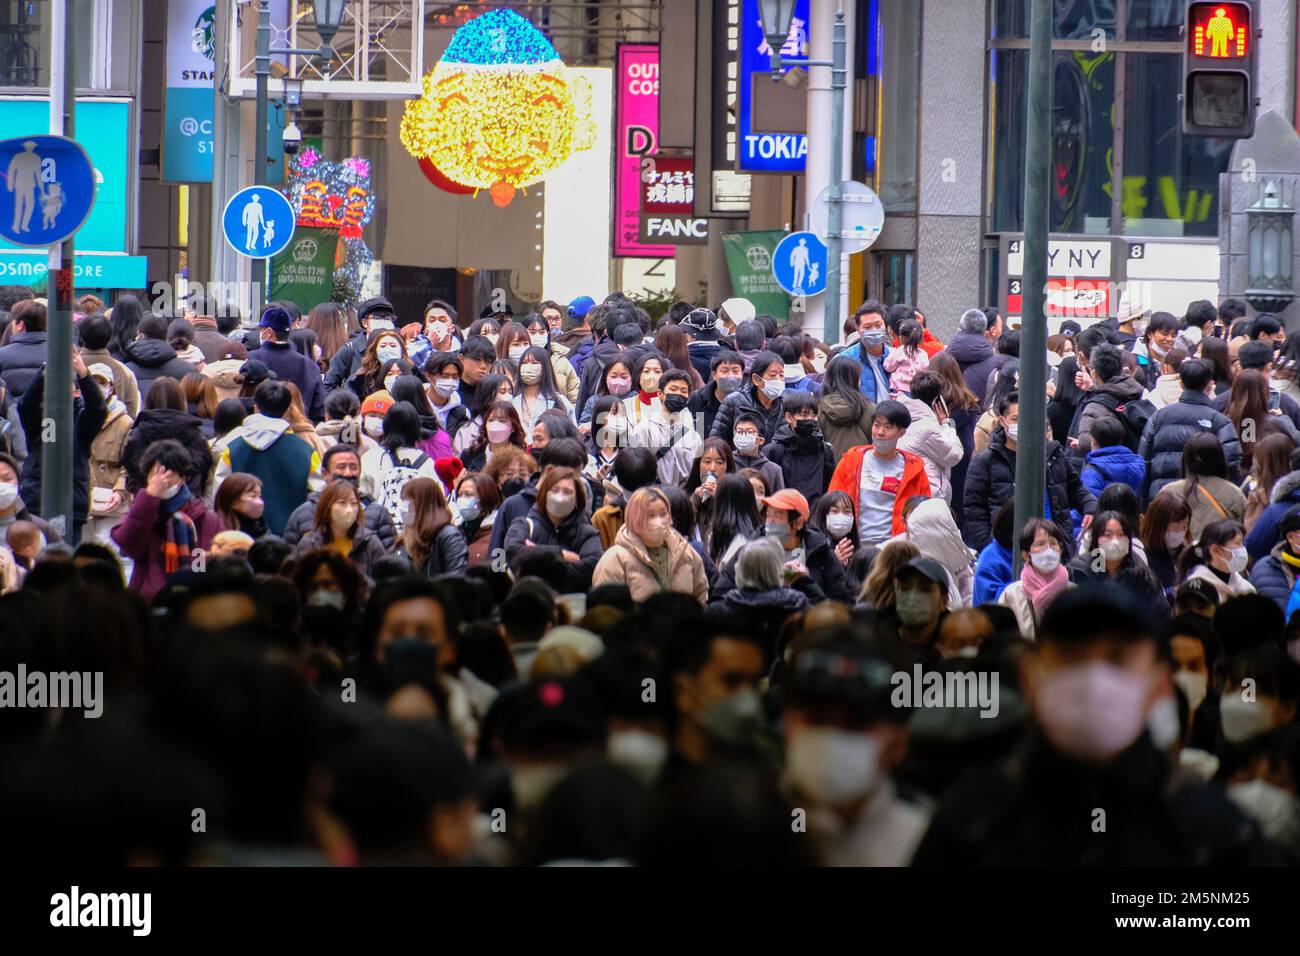 Osaka, Japan. 30th Dec, 2022. People shop along the streets of Shinsaibashi in Osaka, Japan. Shinsaibashi is a narrow street market filled with more than 500 retailers based near Ueno station. Every year shoppers came to the popular spot to buy food for the New Year celebration. Credit: SOPA Images Limited/Alamy Live News Stock Photo